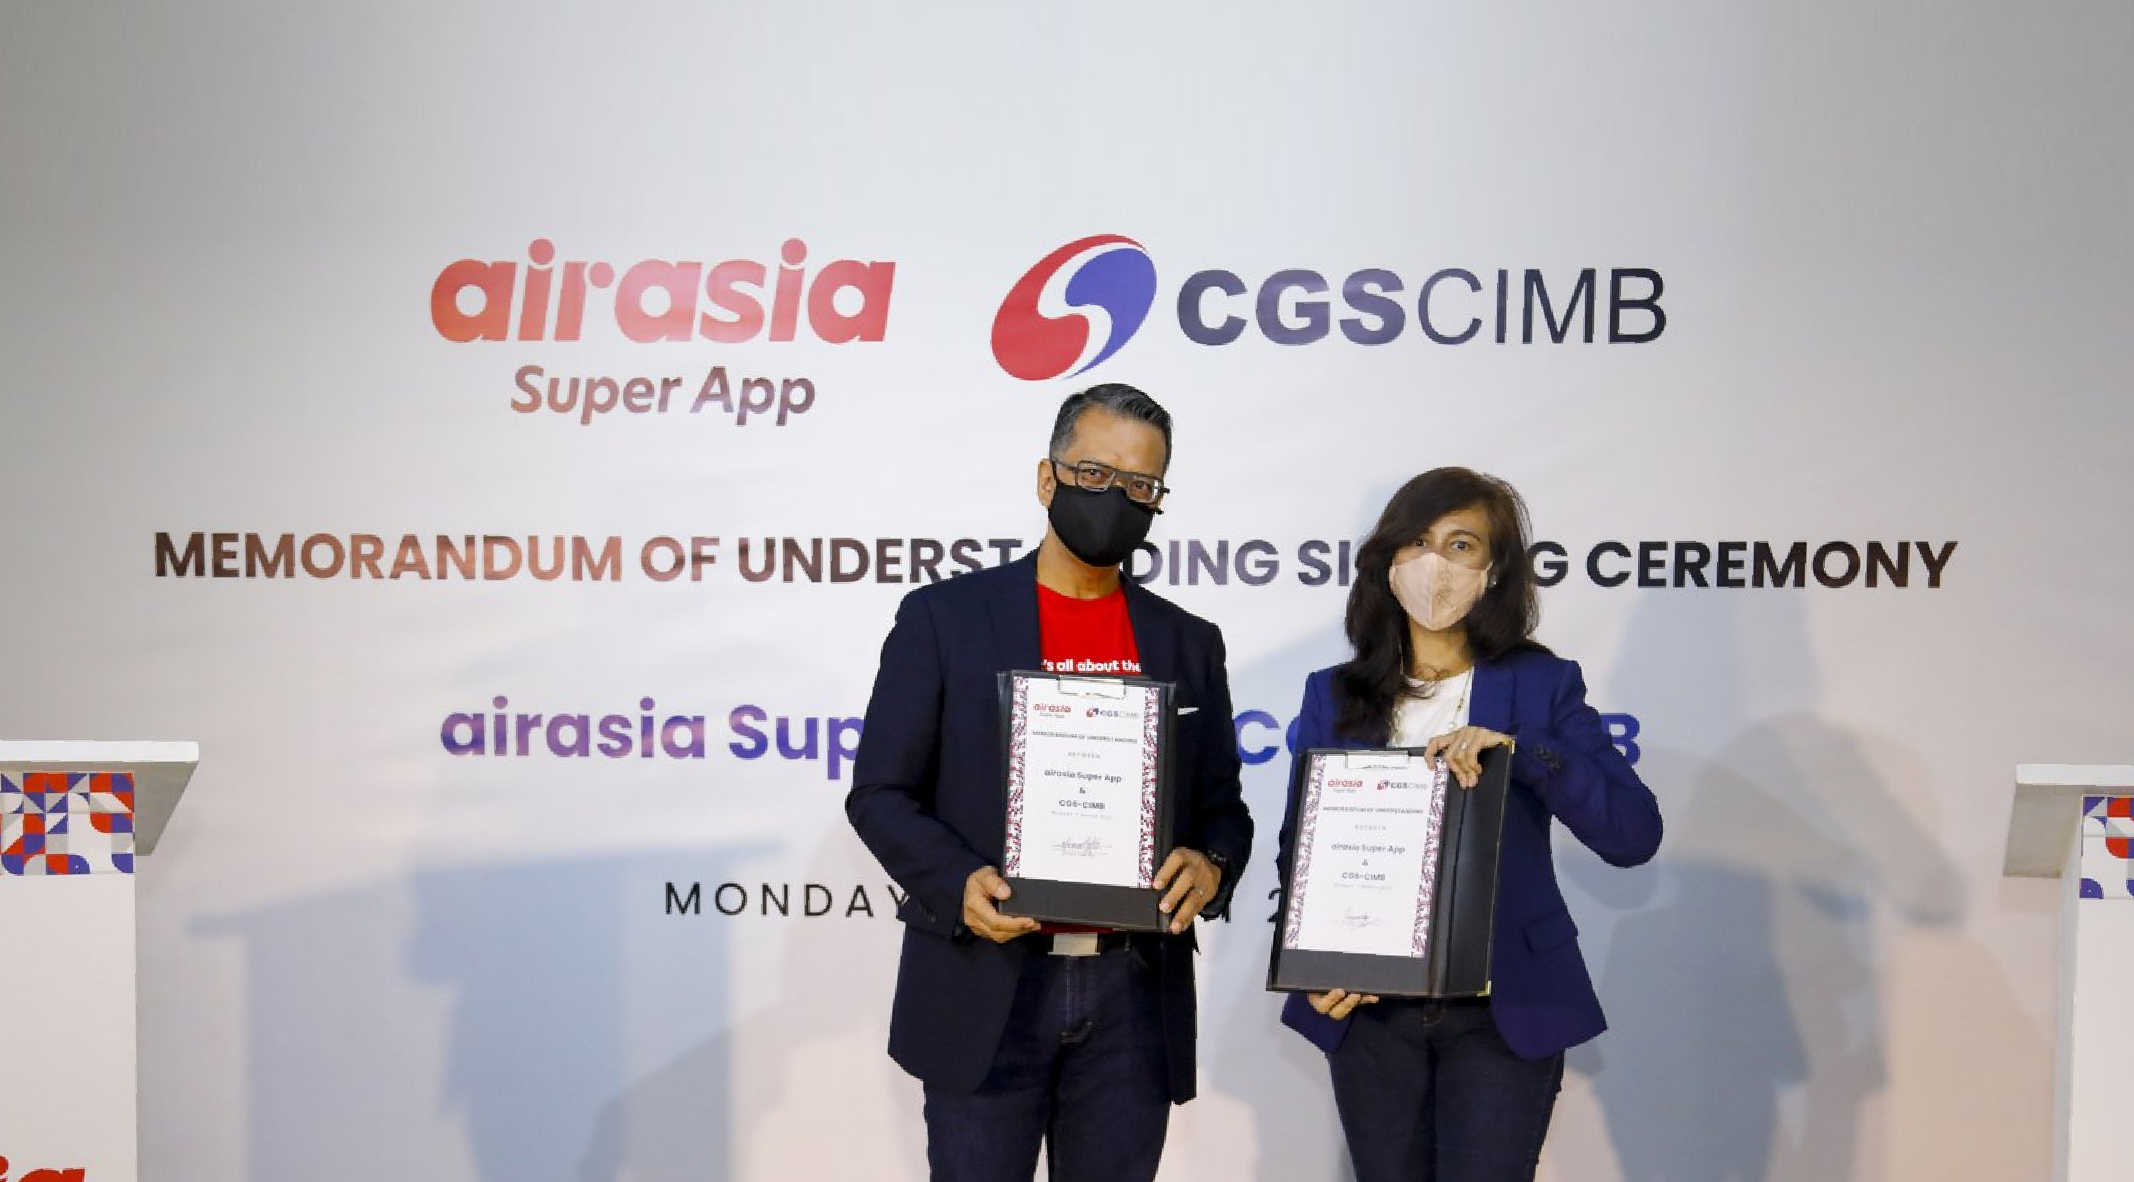 Airasia Inks MoU With CGS-CIMB Securities to Get Into the Investment Space